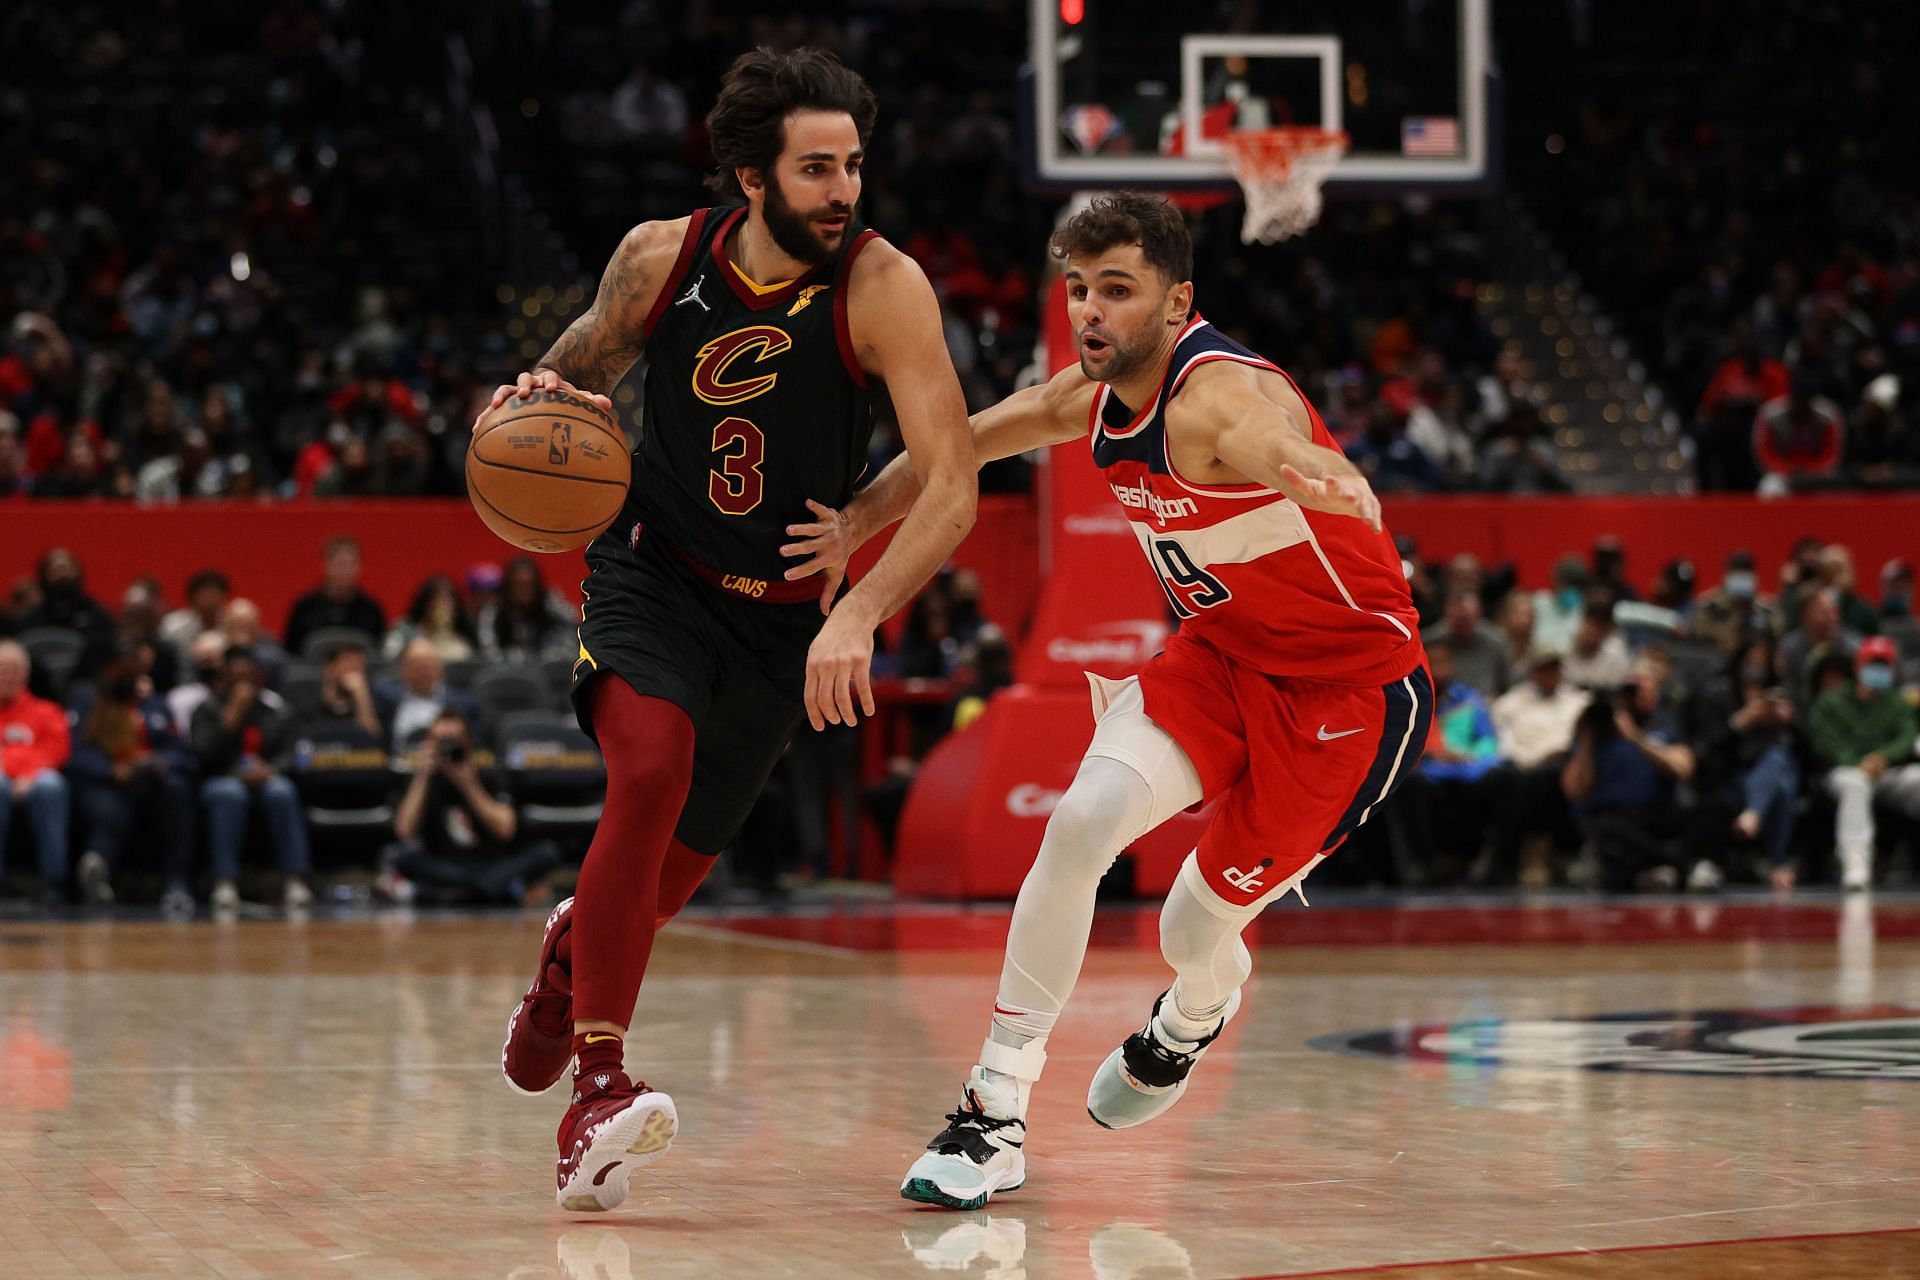 Ricky Rubio of the Cleveland Cavaliers drives against the Washington Wizards at Capital One Arena on Dec. 03, 2021, in Washington, DC.